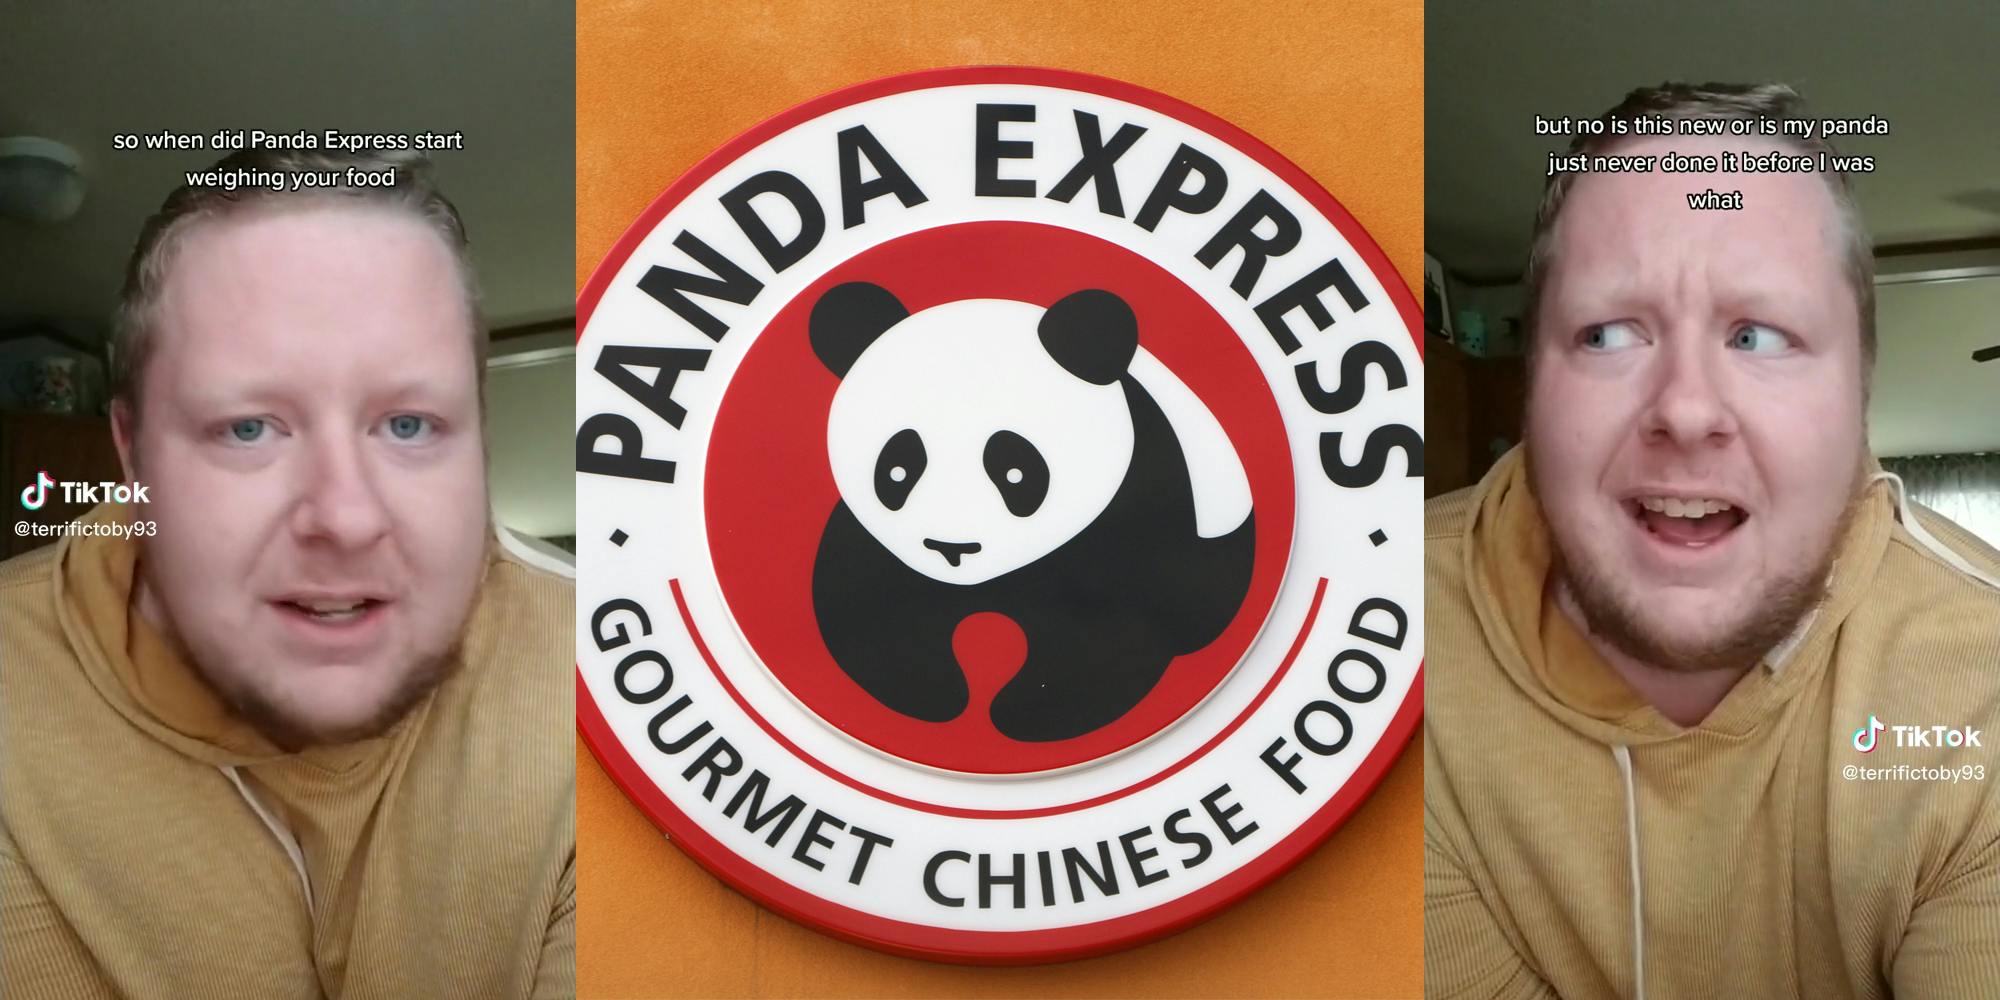 man with caption "so when did Panda Express start weighing your food" and "but no is this new or is my panda just never done it before I was what" (l&r) Panda Express sign (c)